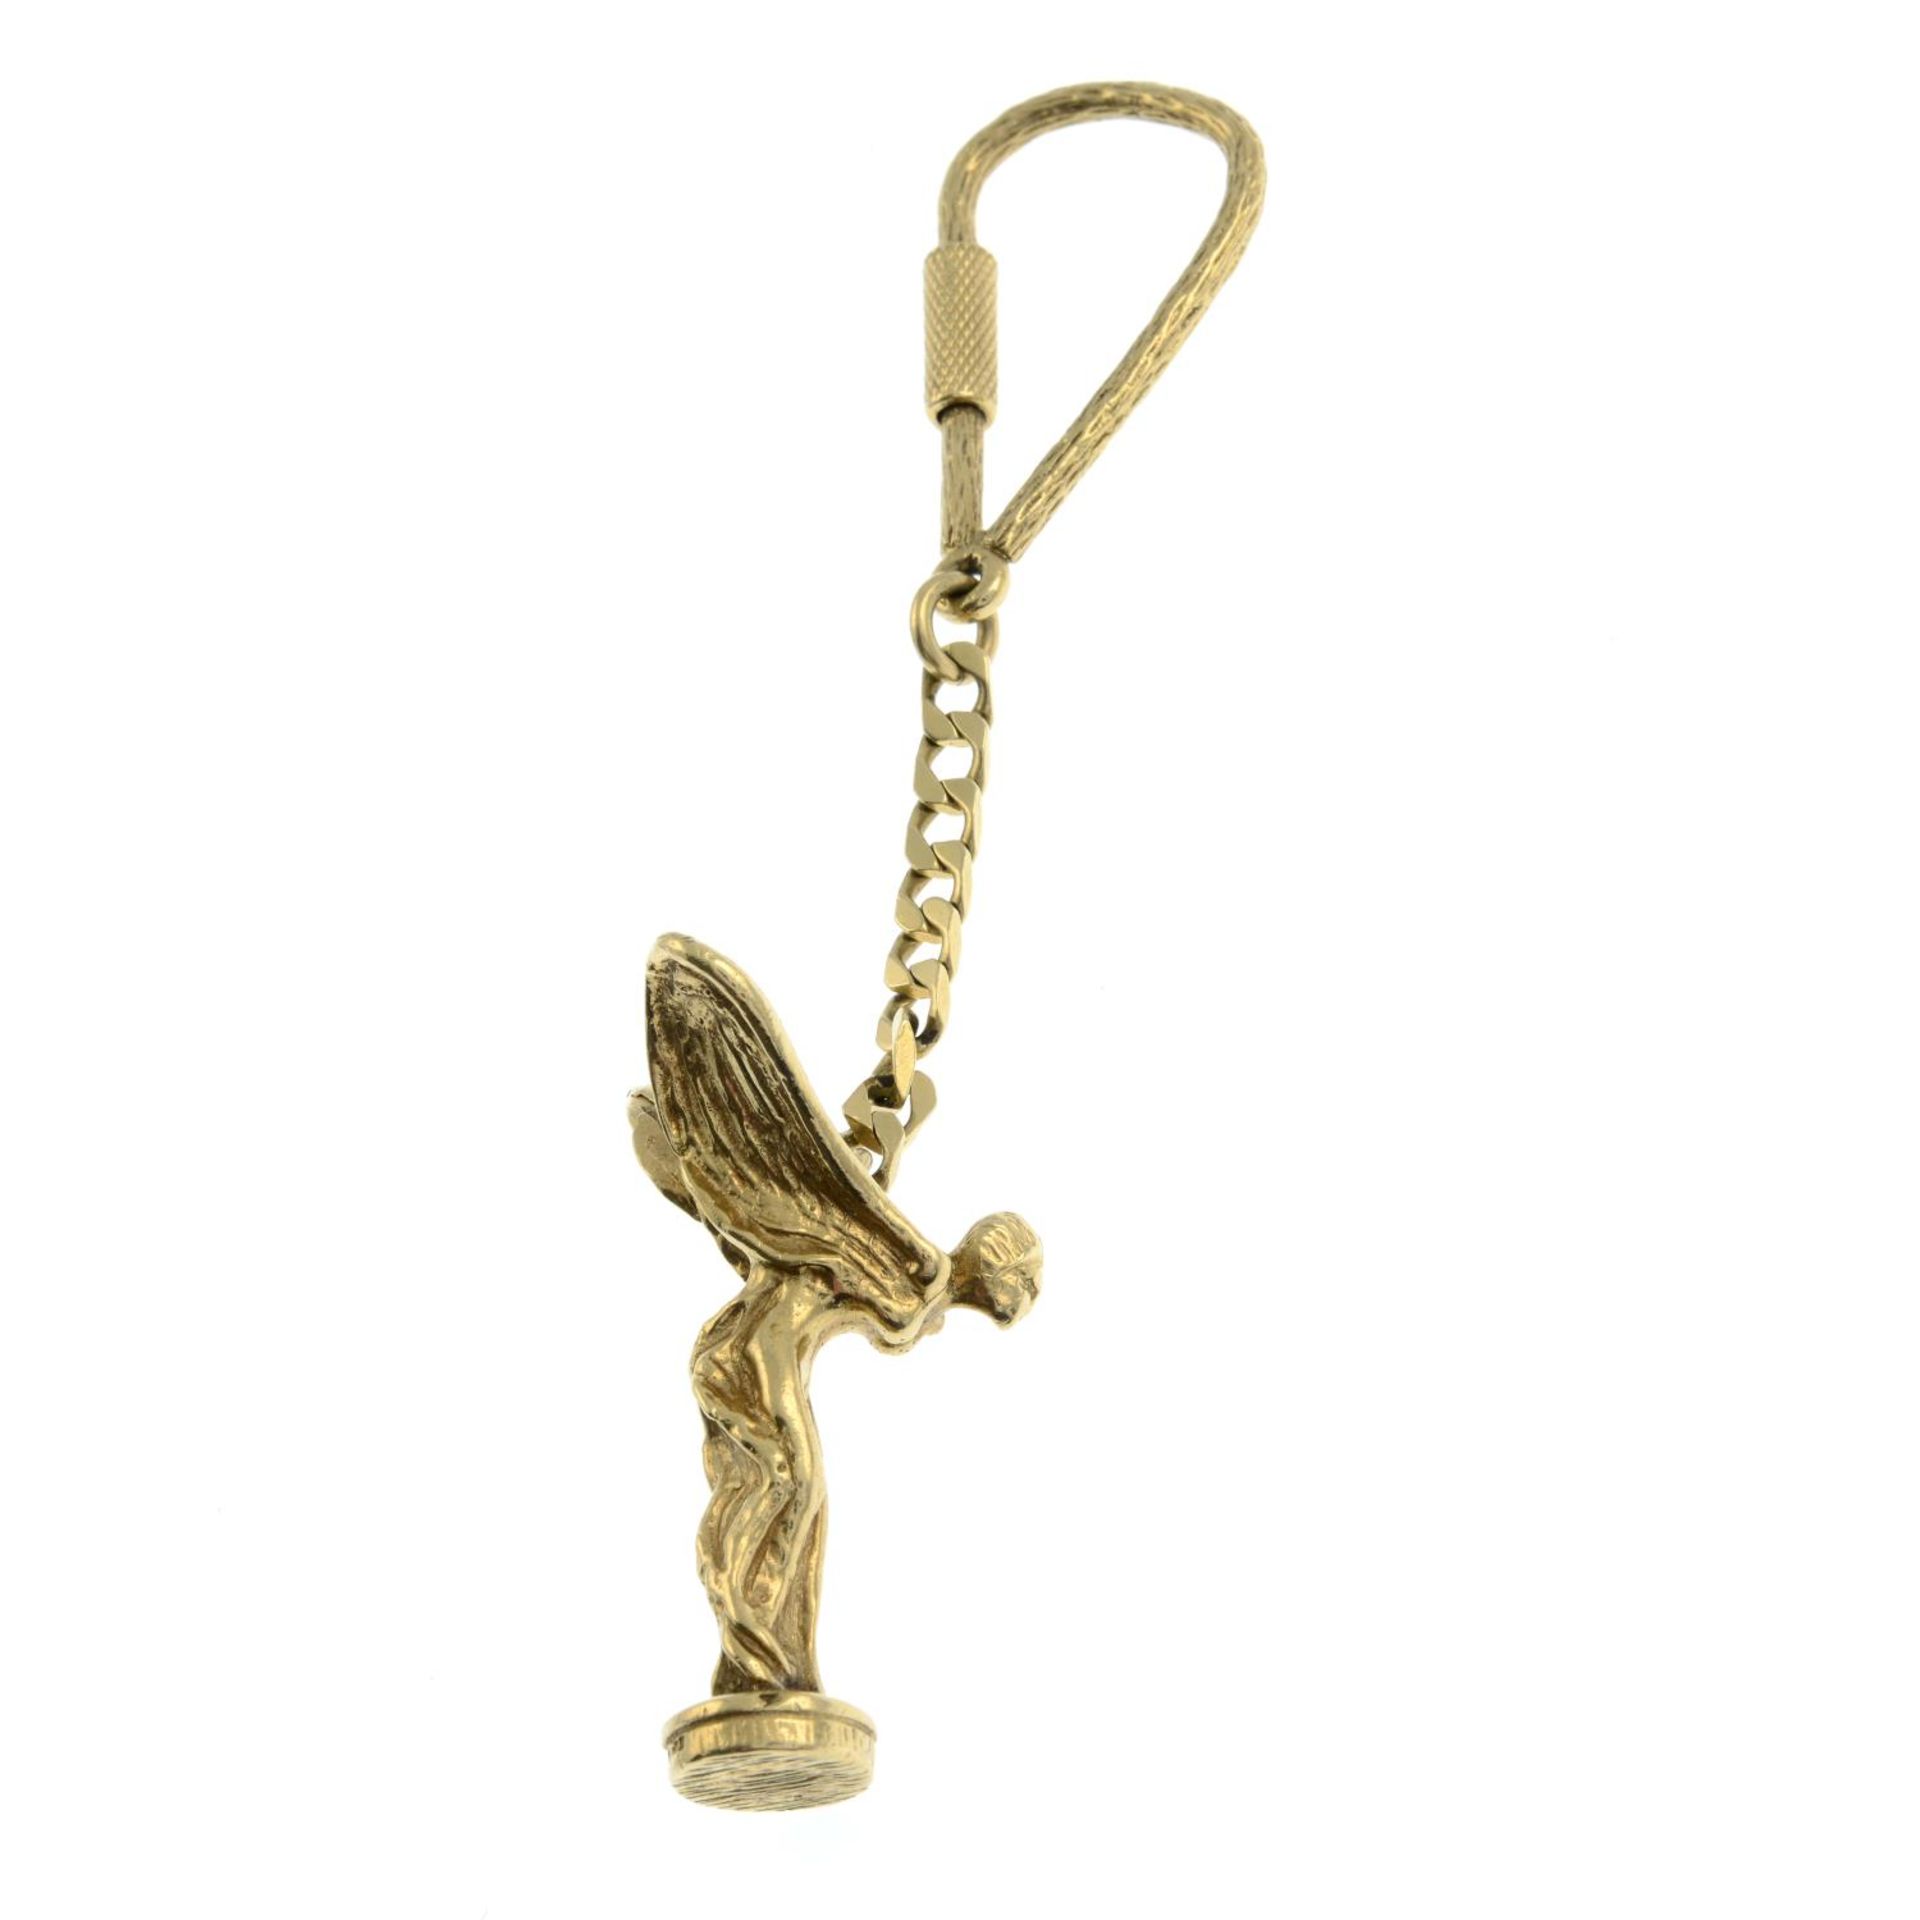 A 9ct gold key ring, suspending a Spirit of Ecstasy charm.Hallmarks for London 1989. - Image 3 of 3